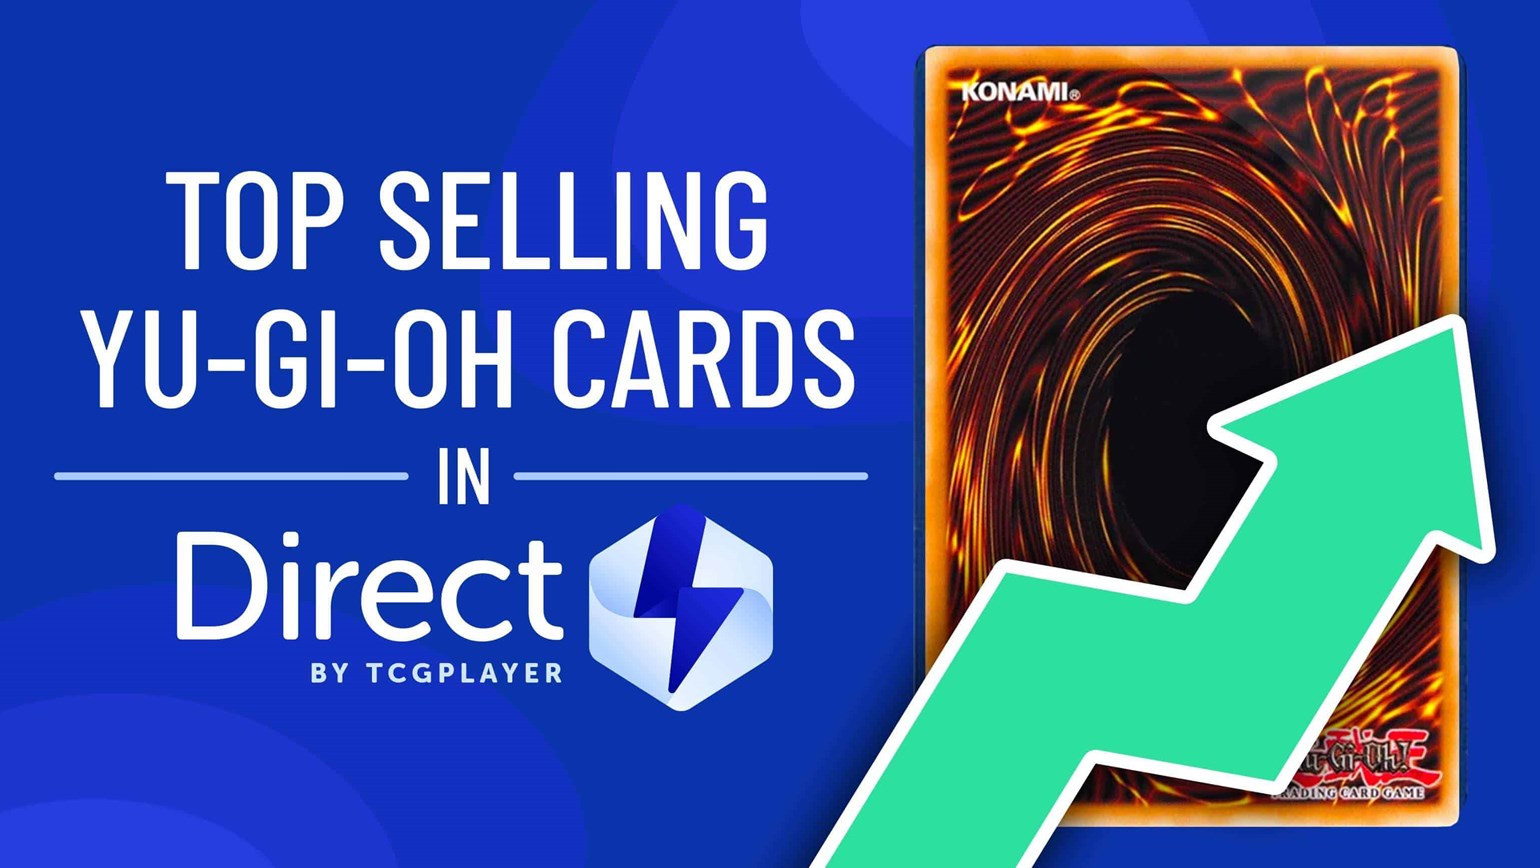 March Top Selling Yu-Gi-Oh! Cards in Direct by TCGplayer